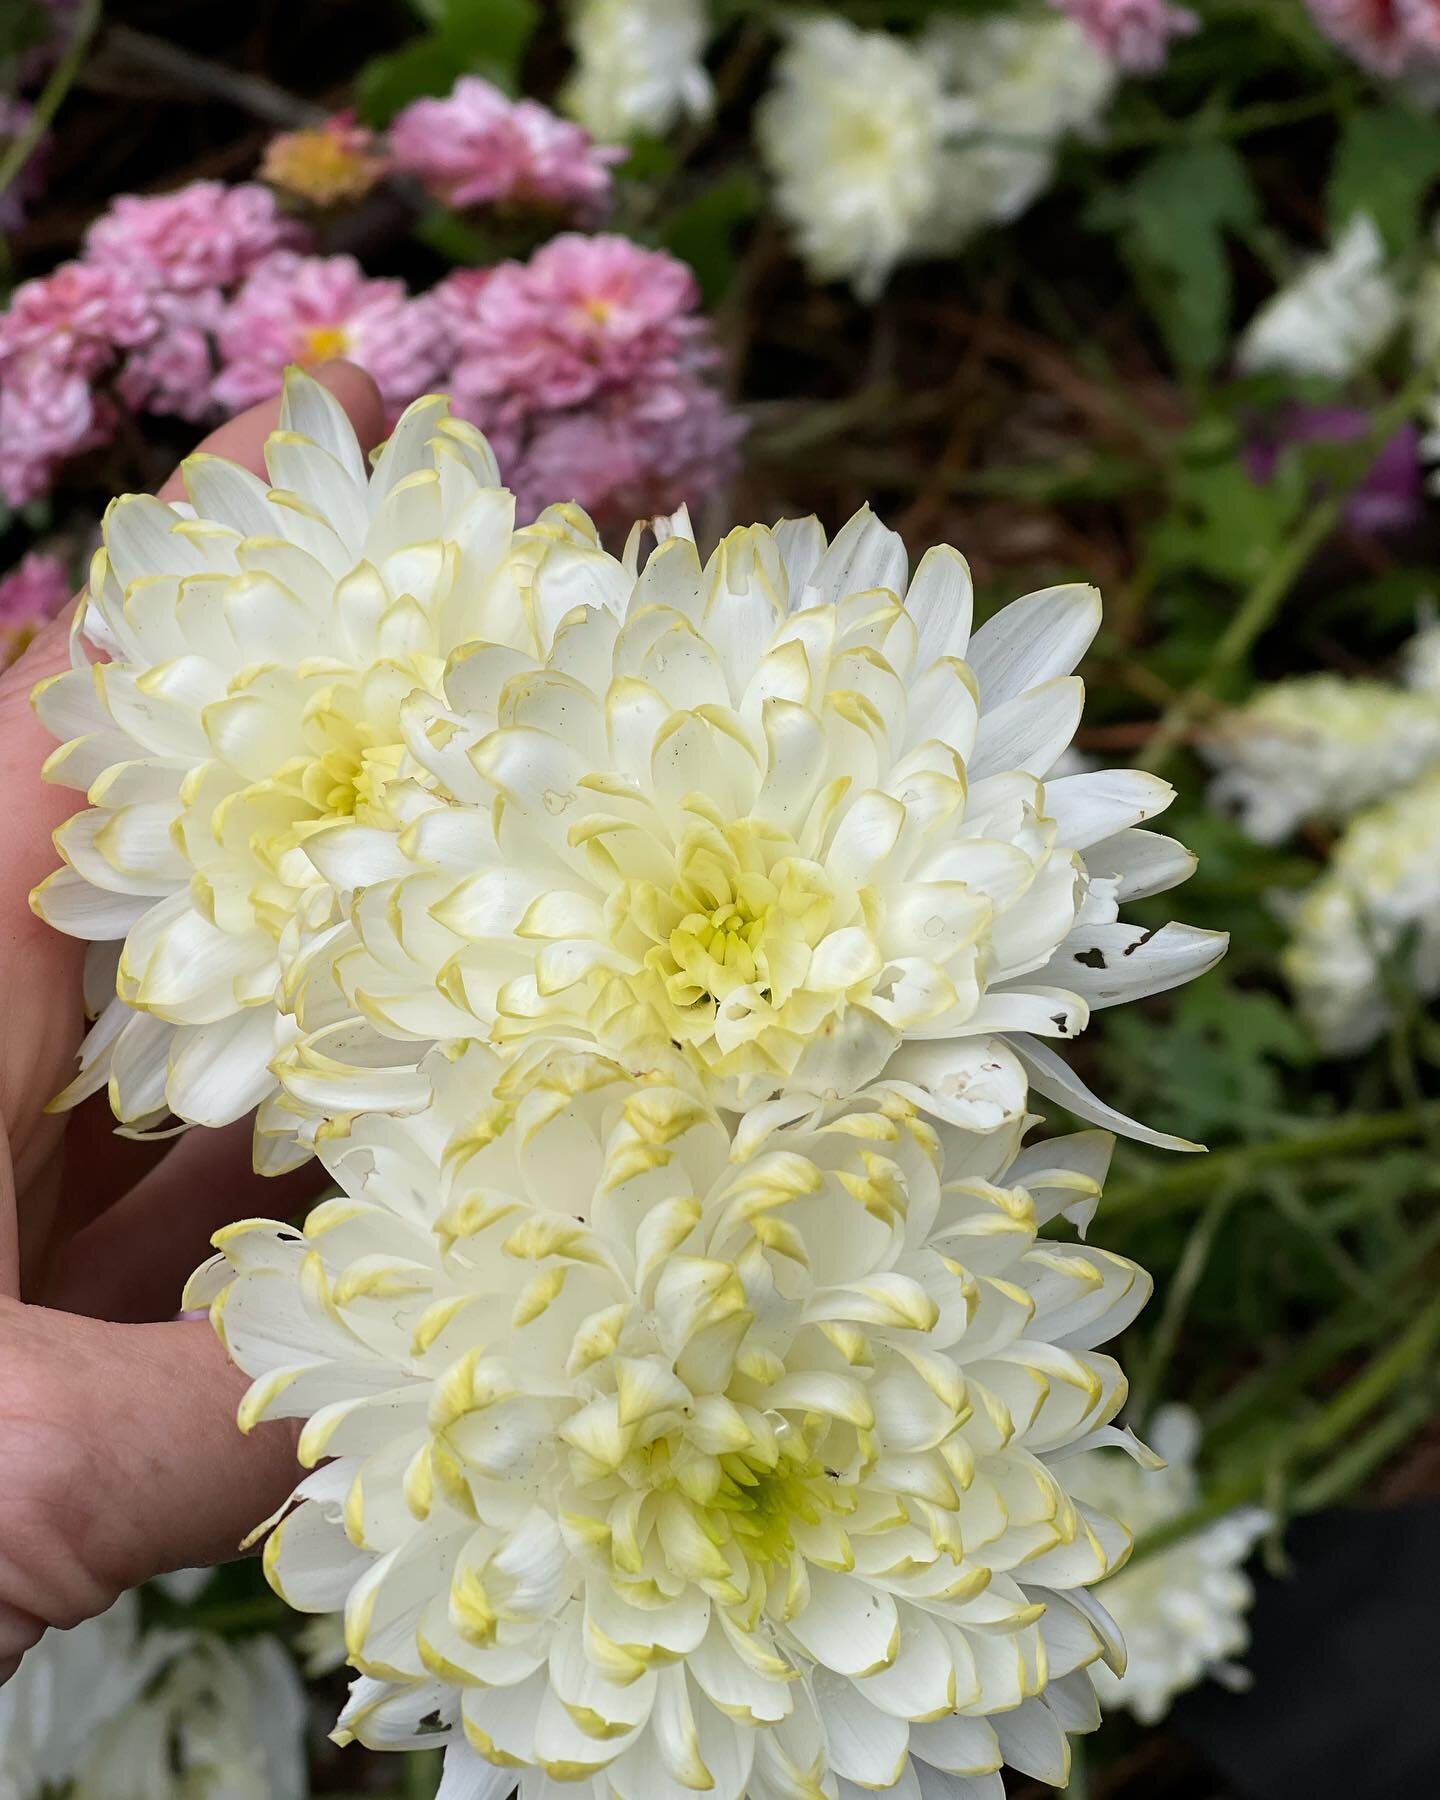 We have some Chrysanthemum plants for sale&hellip;.white with green flecks.  The flowers in this photo are blown but it gives you an idea on what they are like.  Great for cut flowers.
We have 13 available ($10 each)&hellip;PM for details x